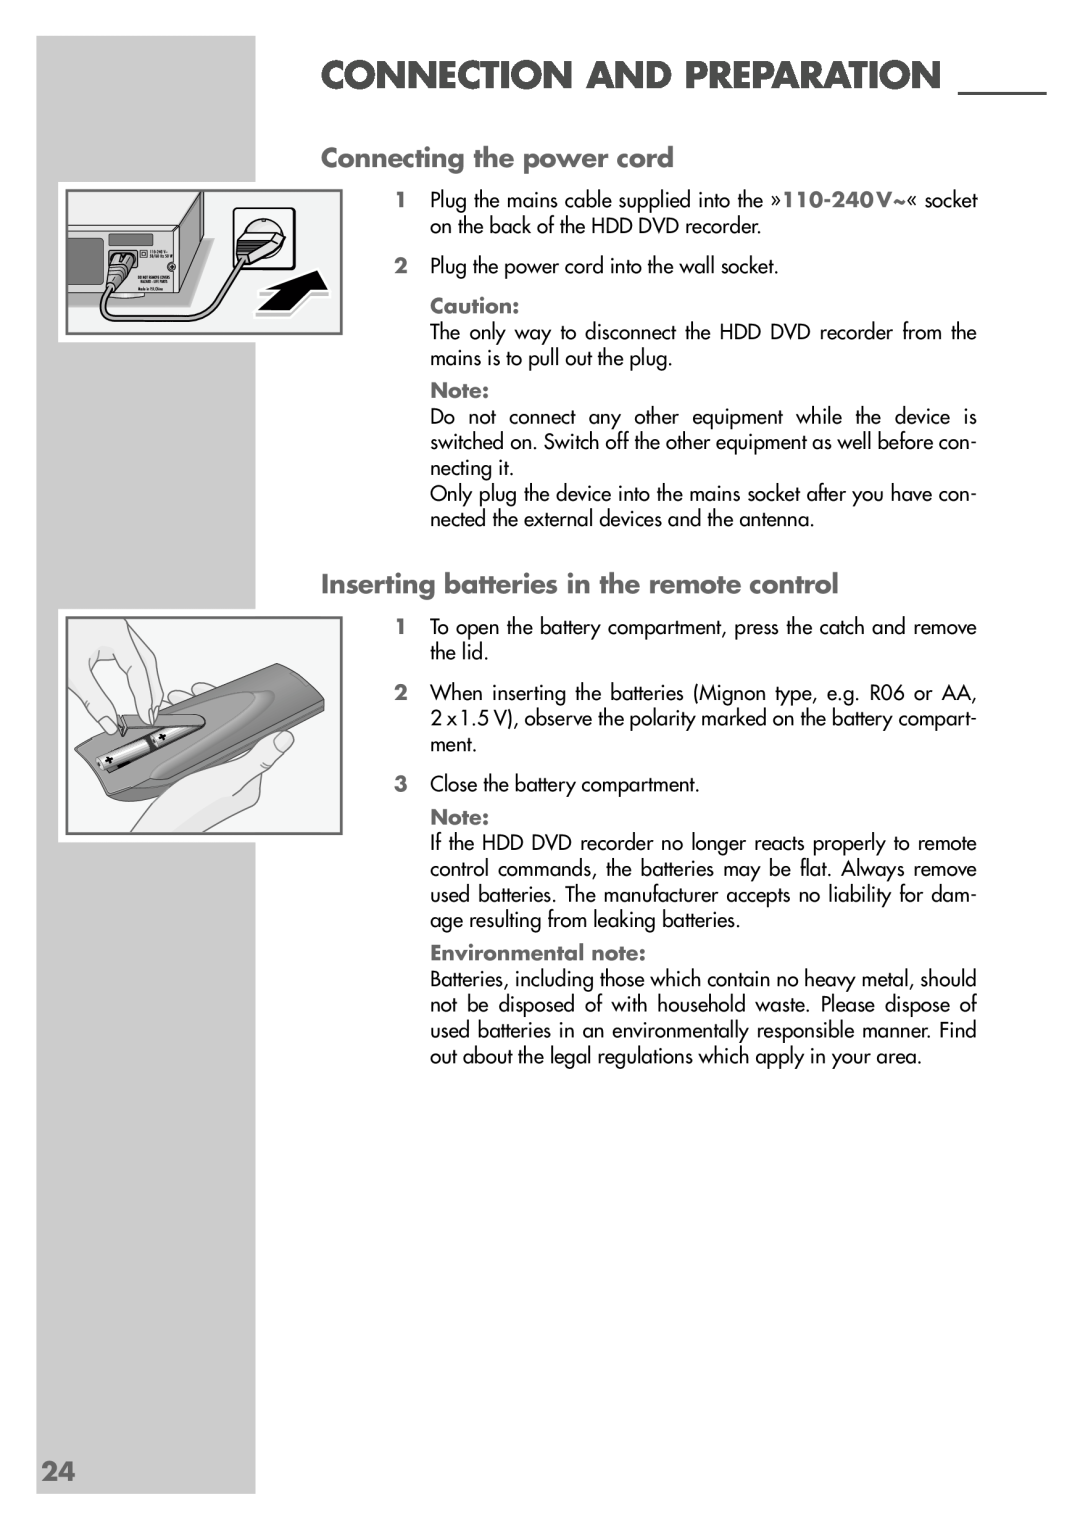 Grundig 5550 HDD manual Connecting the power cord, Inserting batteries in the remote control, Connection And Preparation 